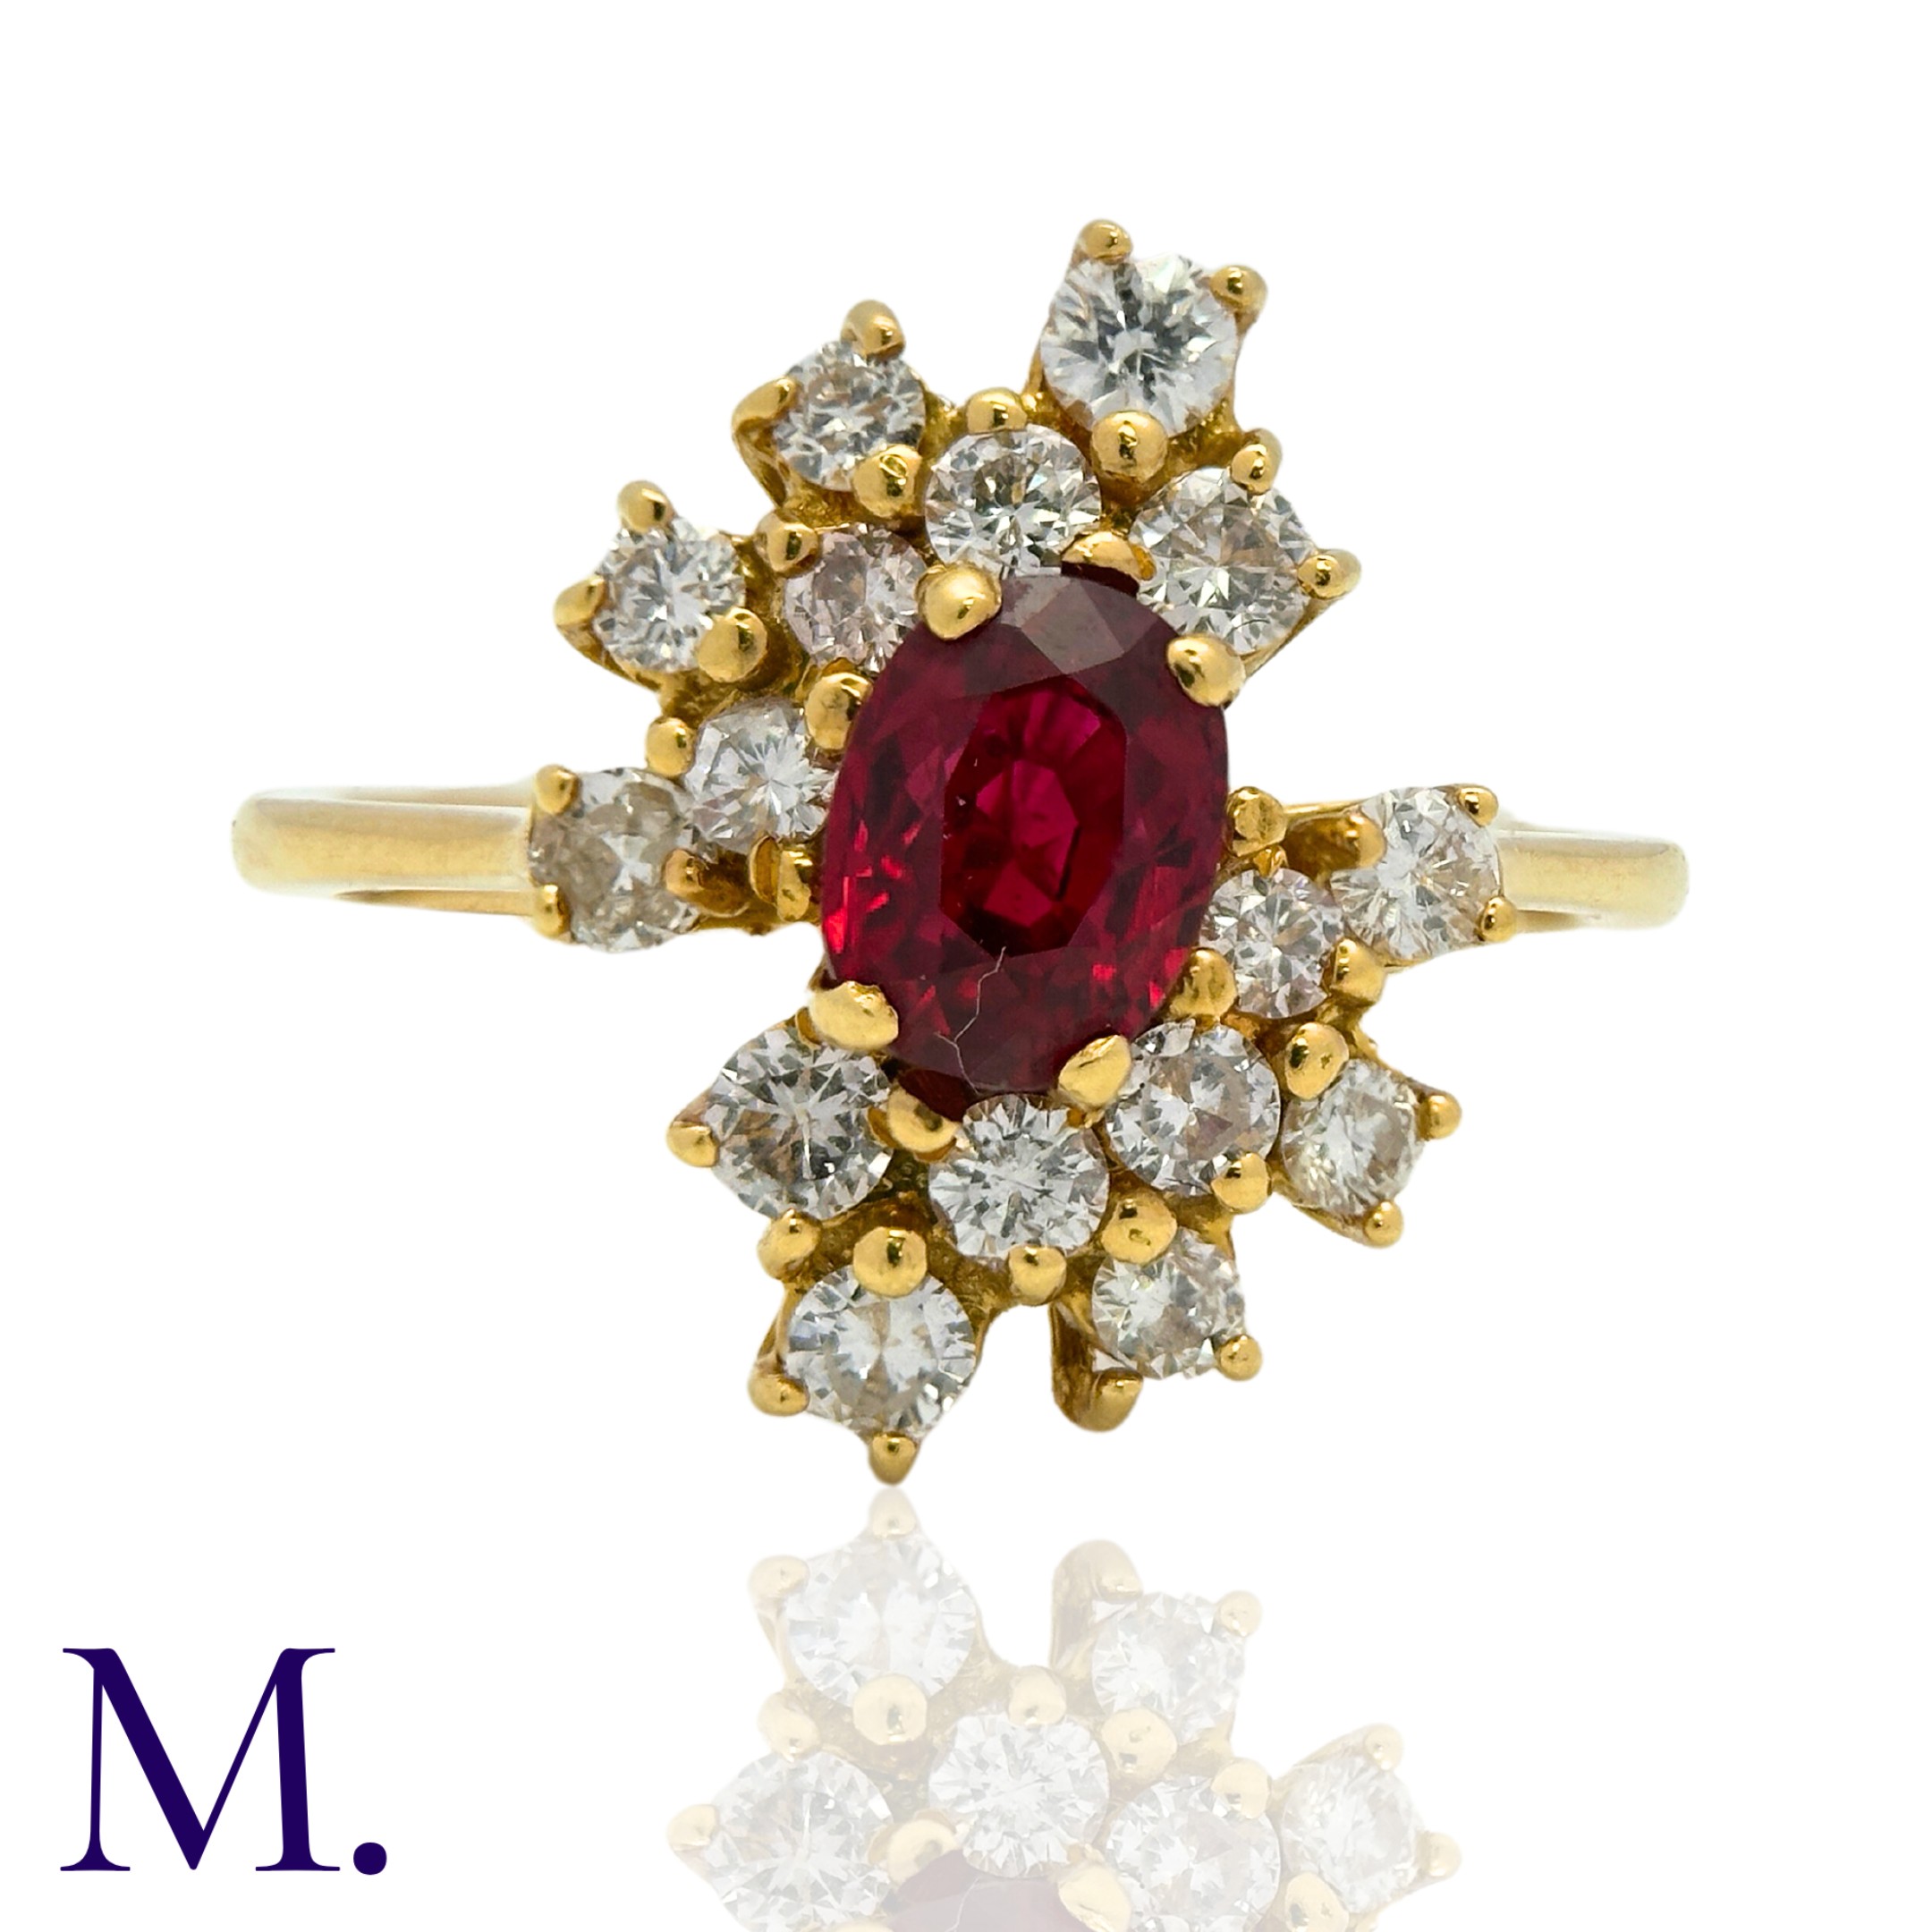 A Ruby and Diamond Ring in 18K yellow gold, set with an oval cut ruby of approximately 0.60ct to the